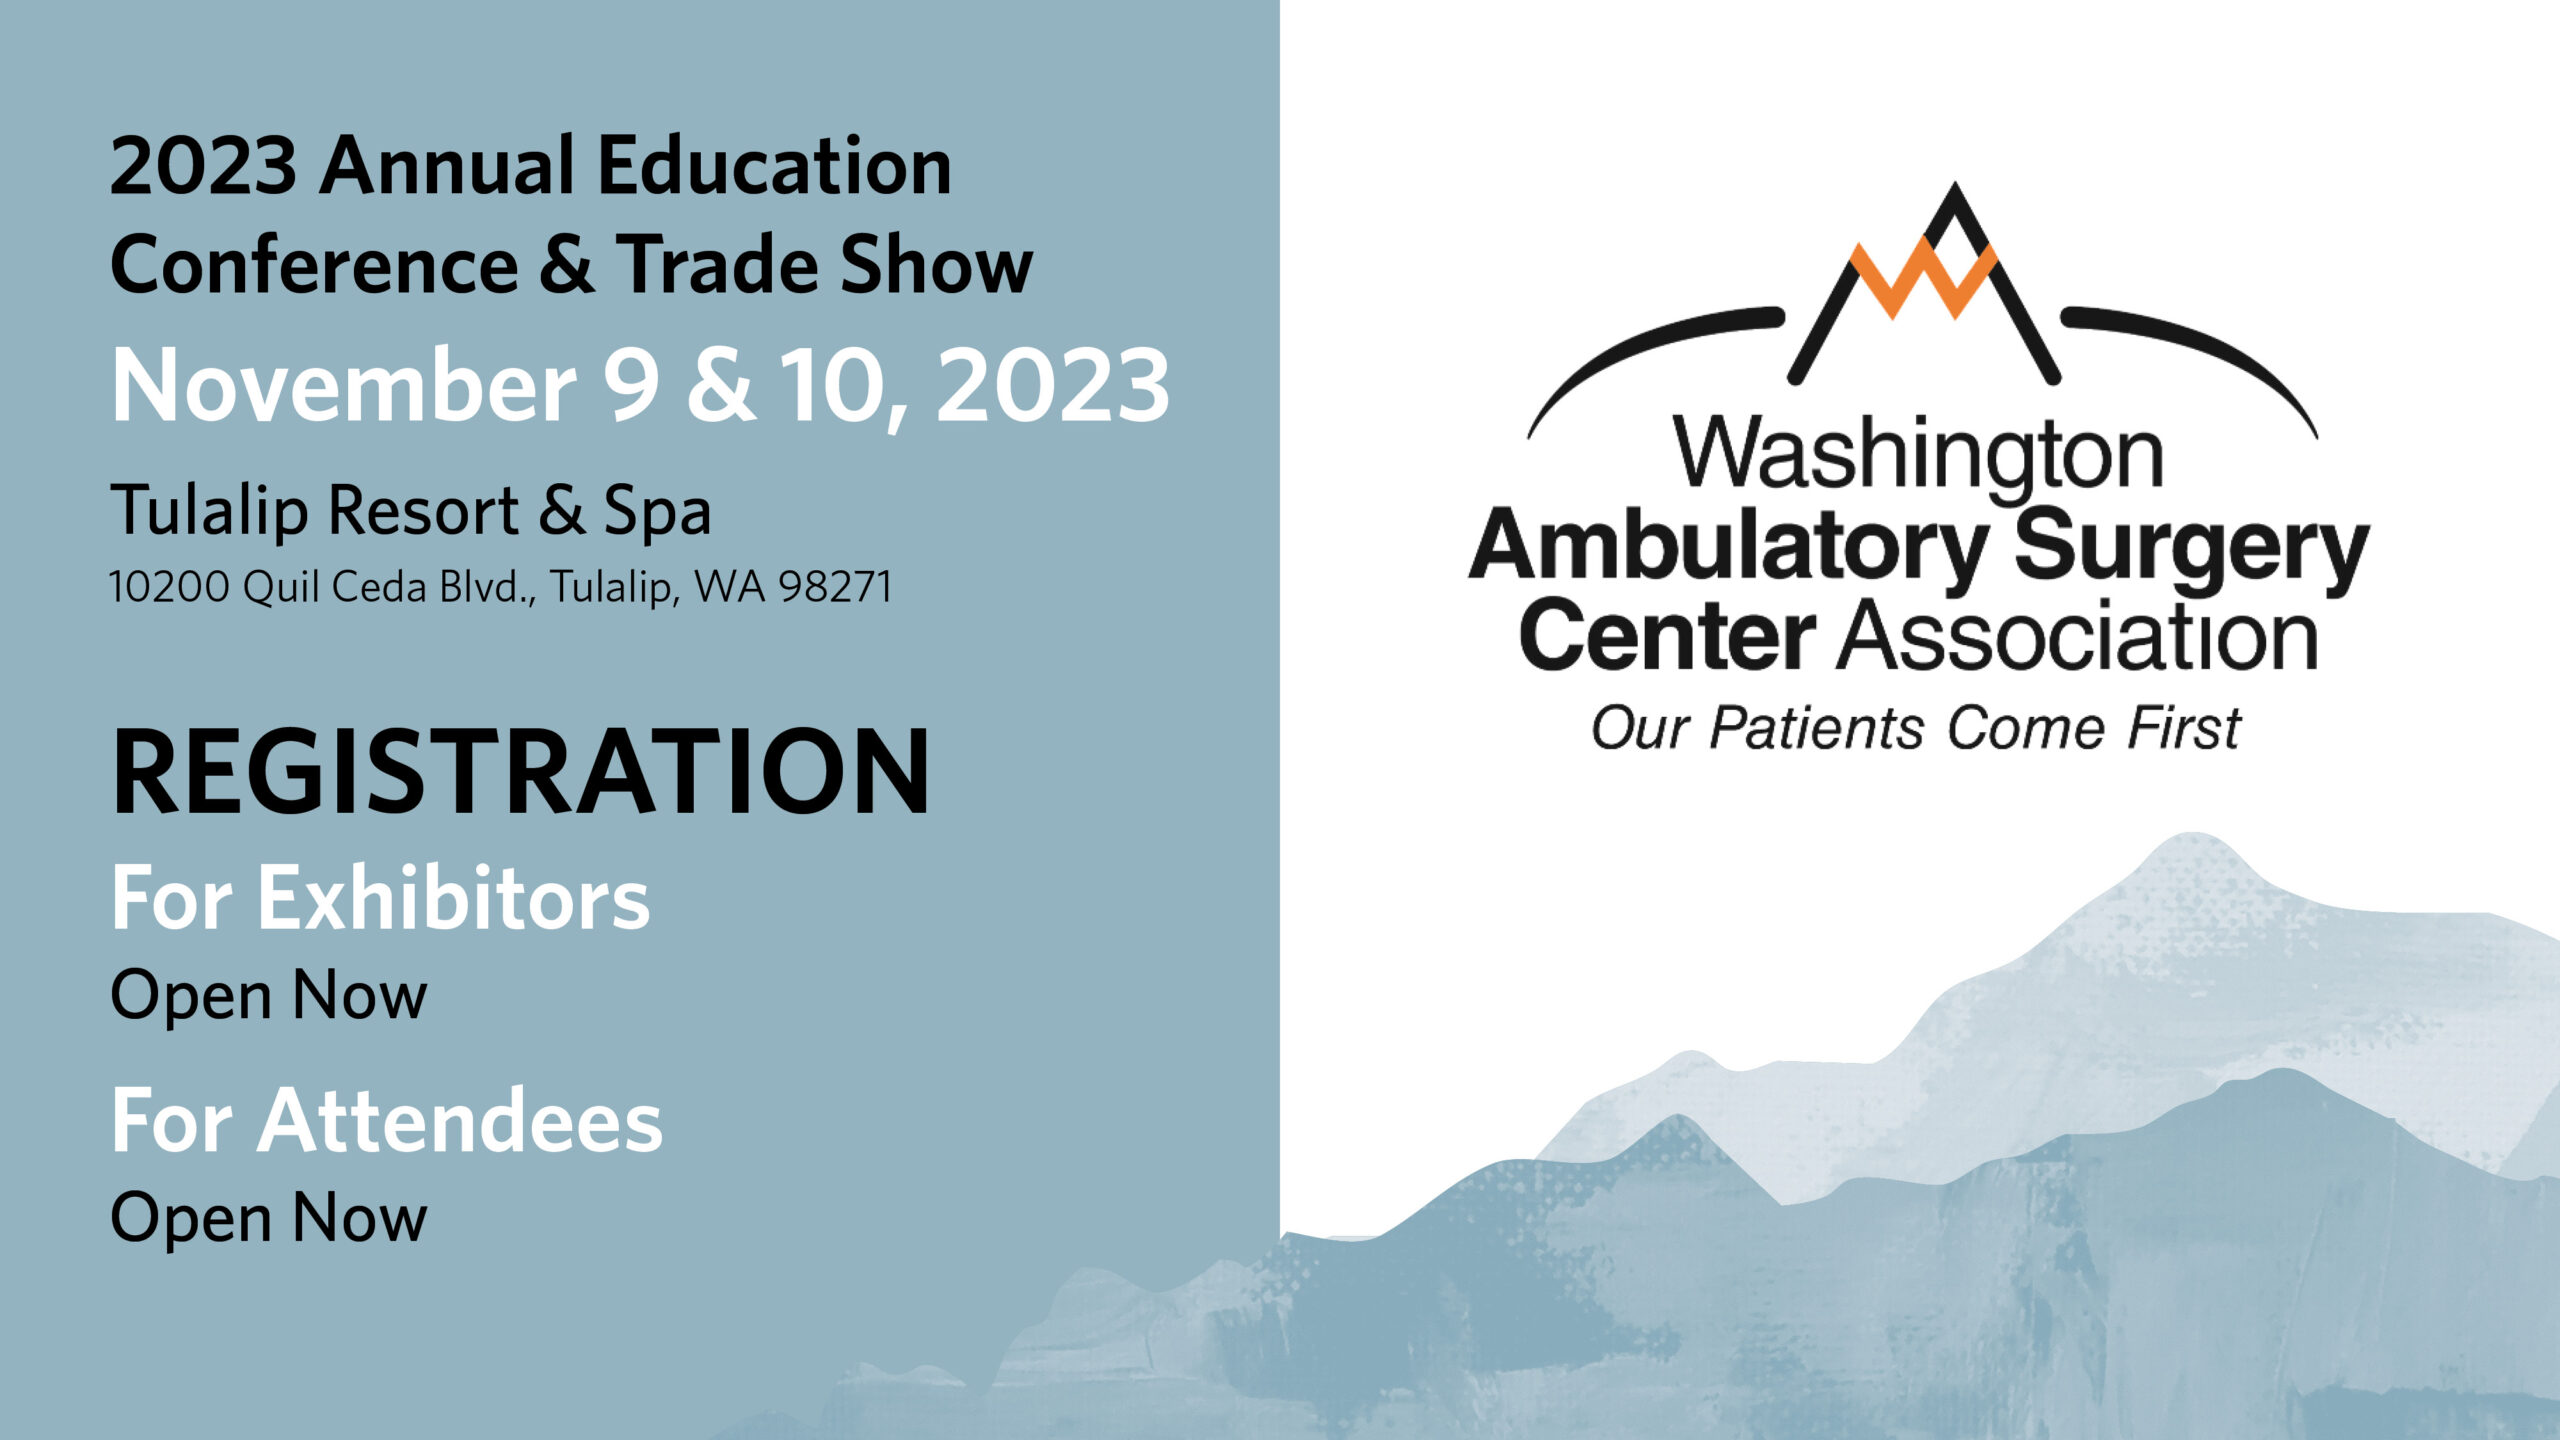 Registration Now Open! n 2022 Annual Education Conference & Trade Show n November 3 & 4, 2022 n Tulalip Resort & Spa 10200 Quil Ceda Blvd., Tulalip, WA, 98271 n We can't wait to see everyone again! Please join us to connect, collaborate, and learn. n Washington Ambulatory Surgery Center Association n Our Patients Come First